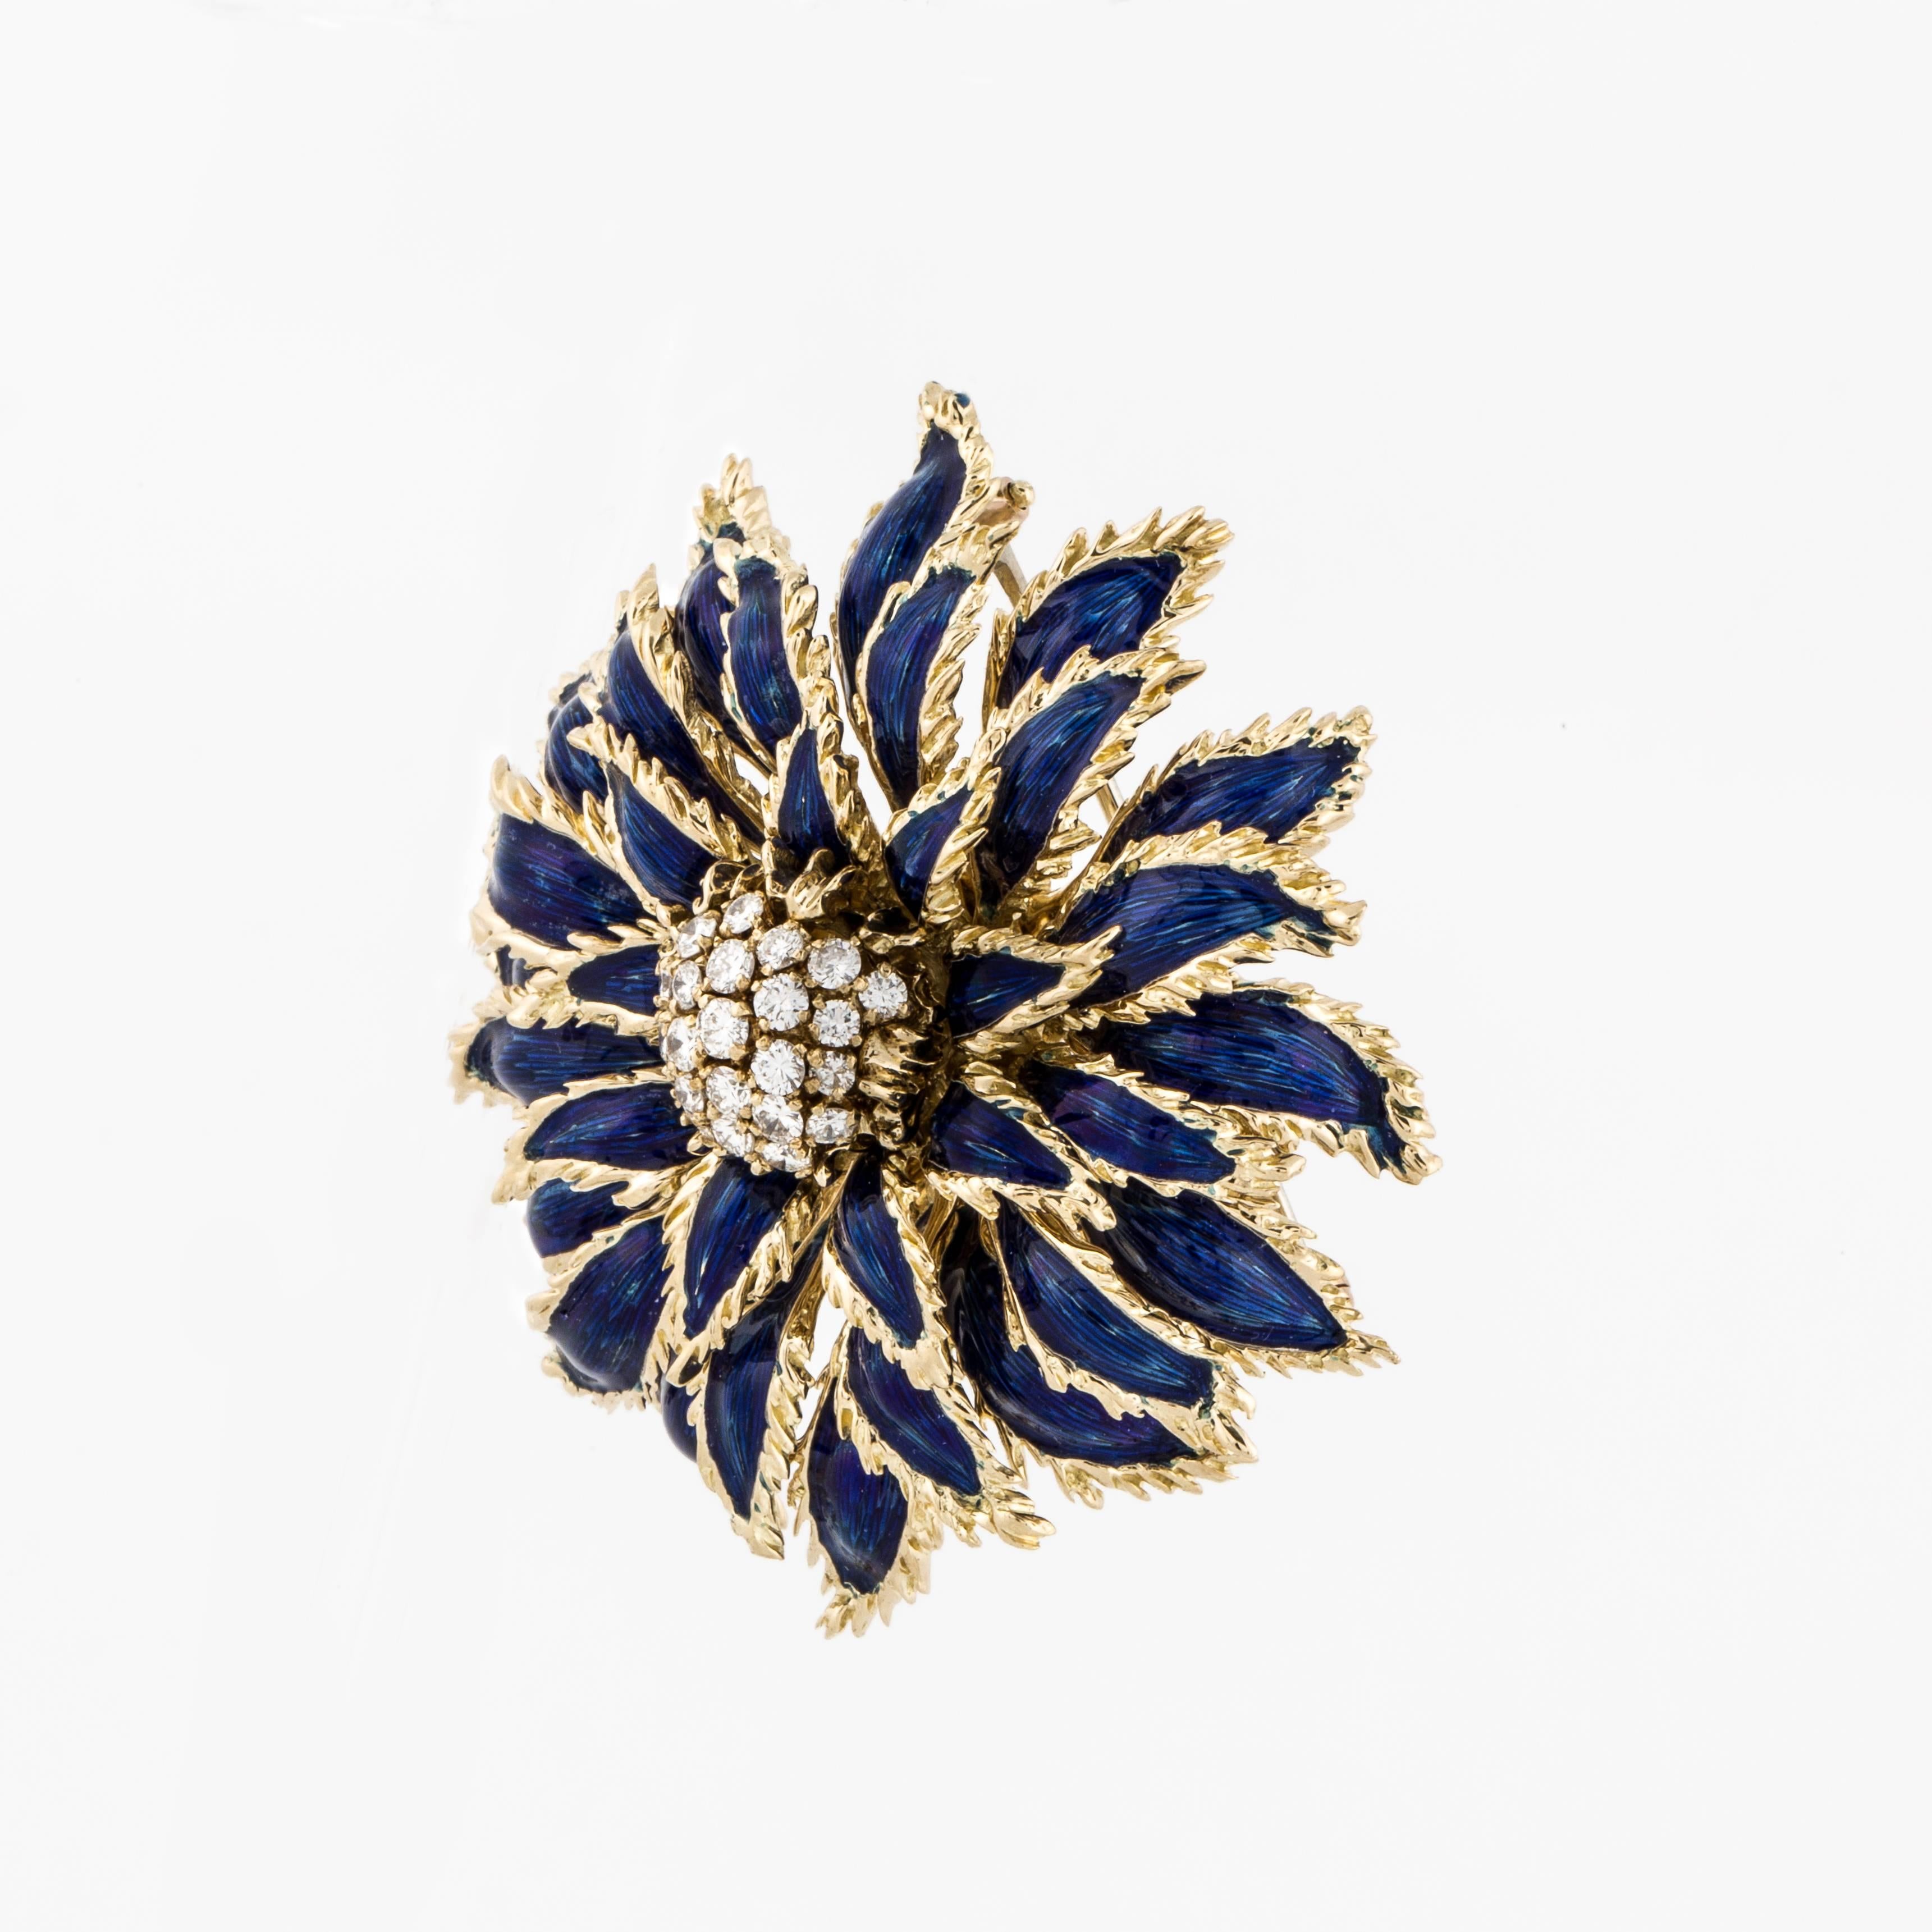 Yellow gold pin marked "Tiffany K18 Italy" on the back.  There are three layers of blue enamel petals surrounding a diamond center.  There are twenty-four (24) round diamonds totaling 1.55 carats.  They are G-H in color and VS-SI in